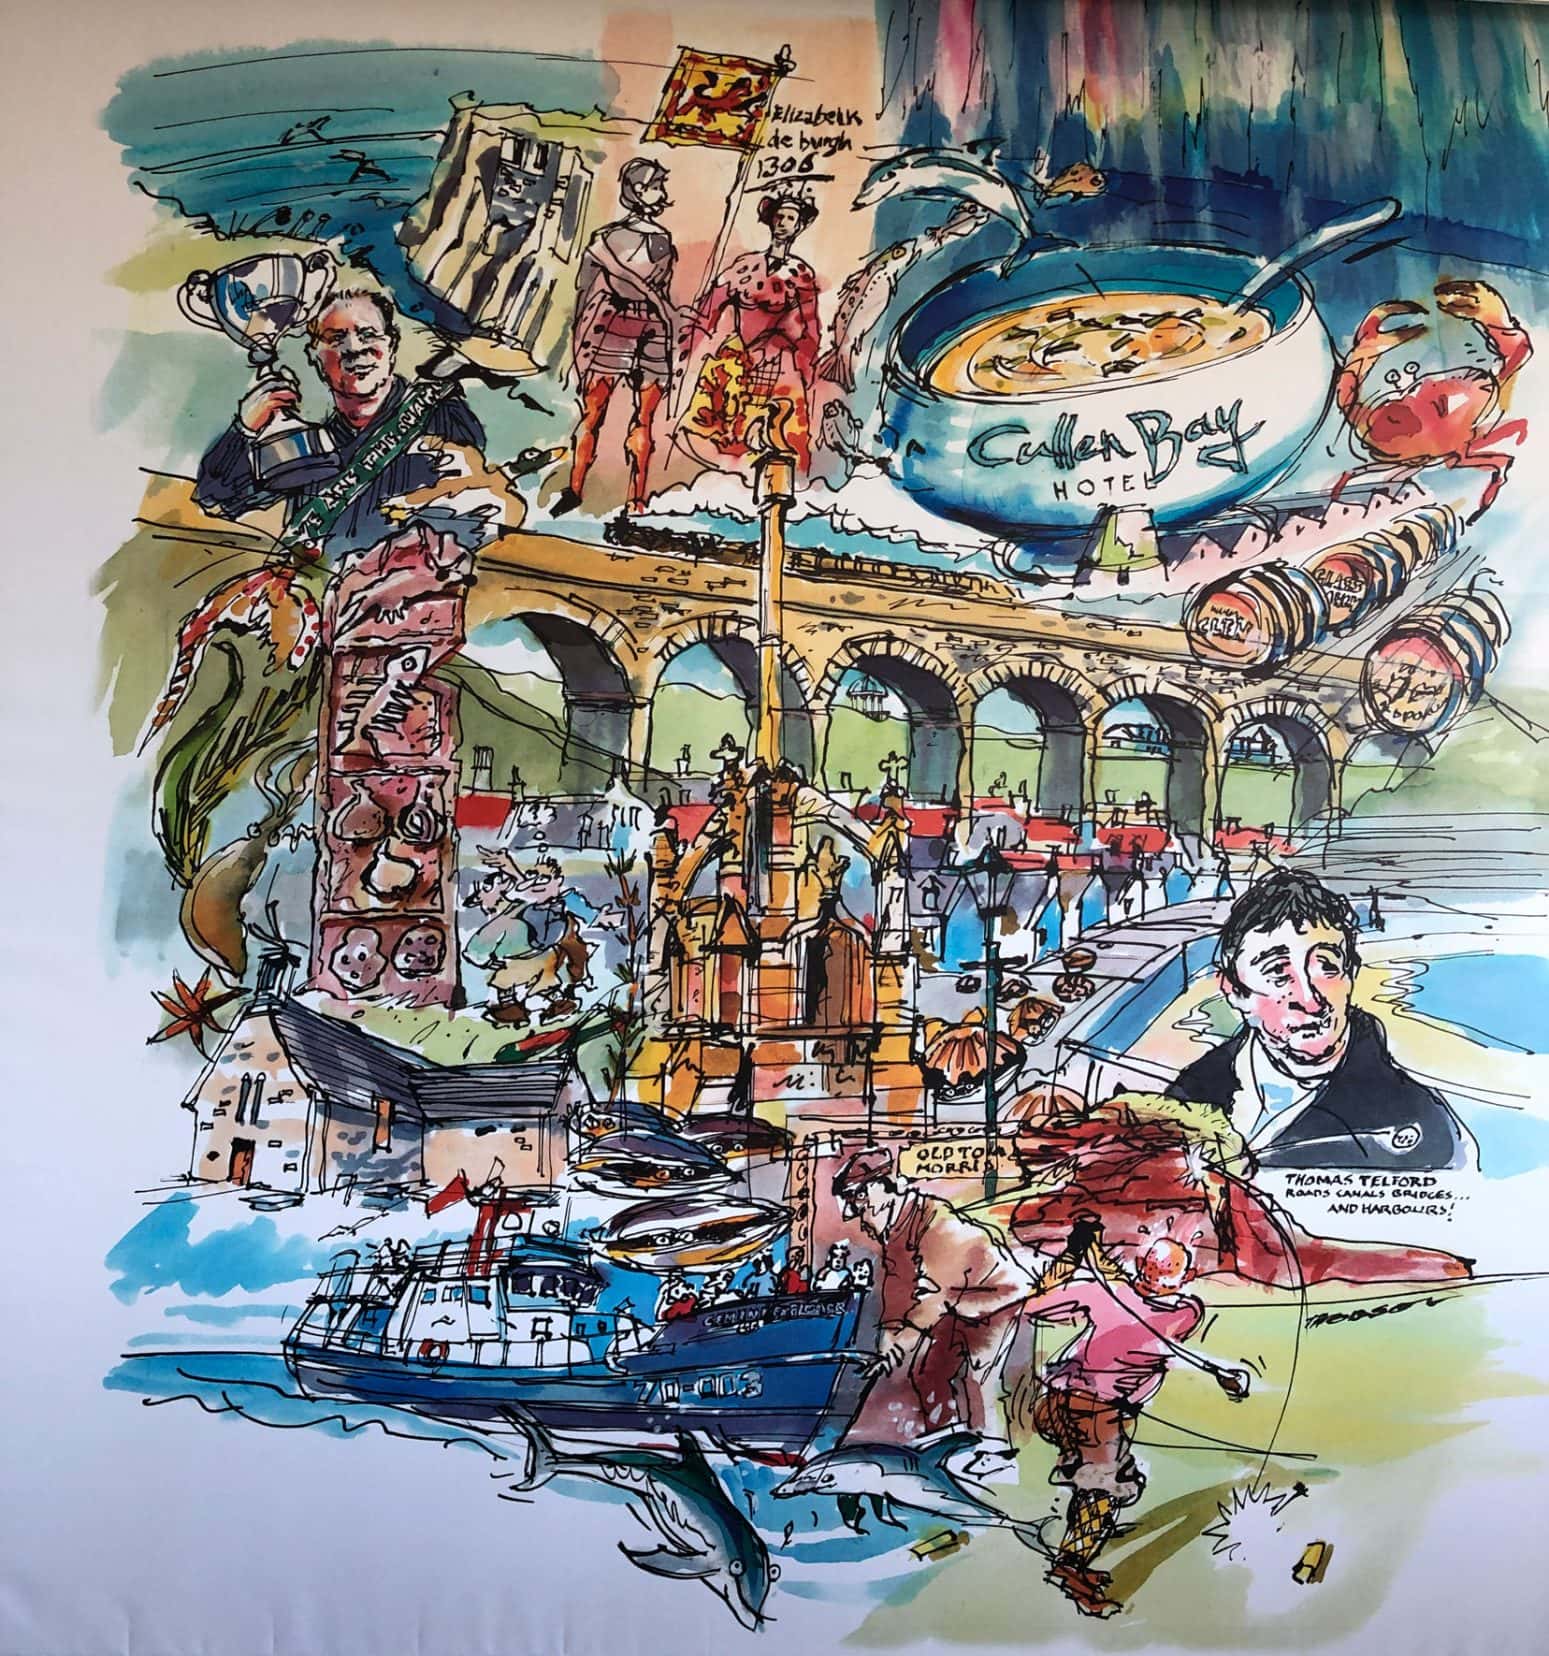 Colourful mural showing the history of Cullen on the wall at Cullen Bay Hotel